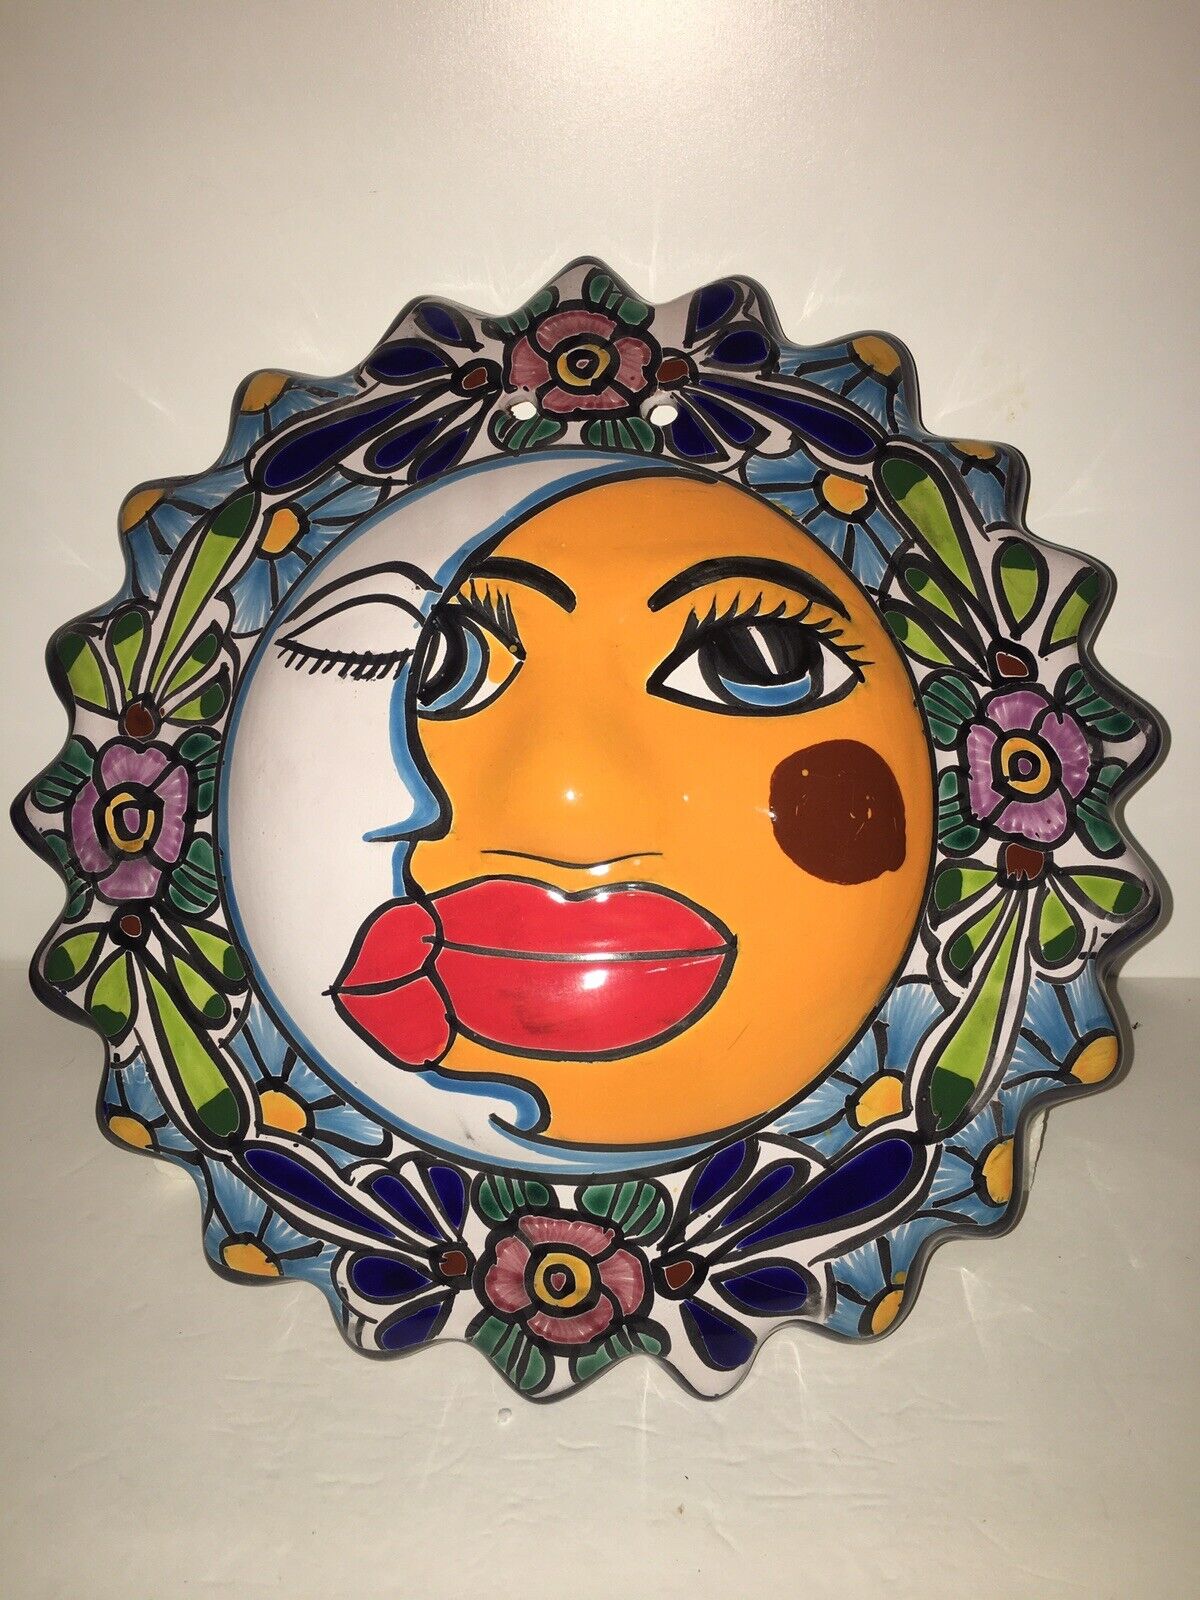 Talavera Mexican Folk Art Pottery Wall Plaque Sun and Moon Eclipse 14”in Round